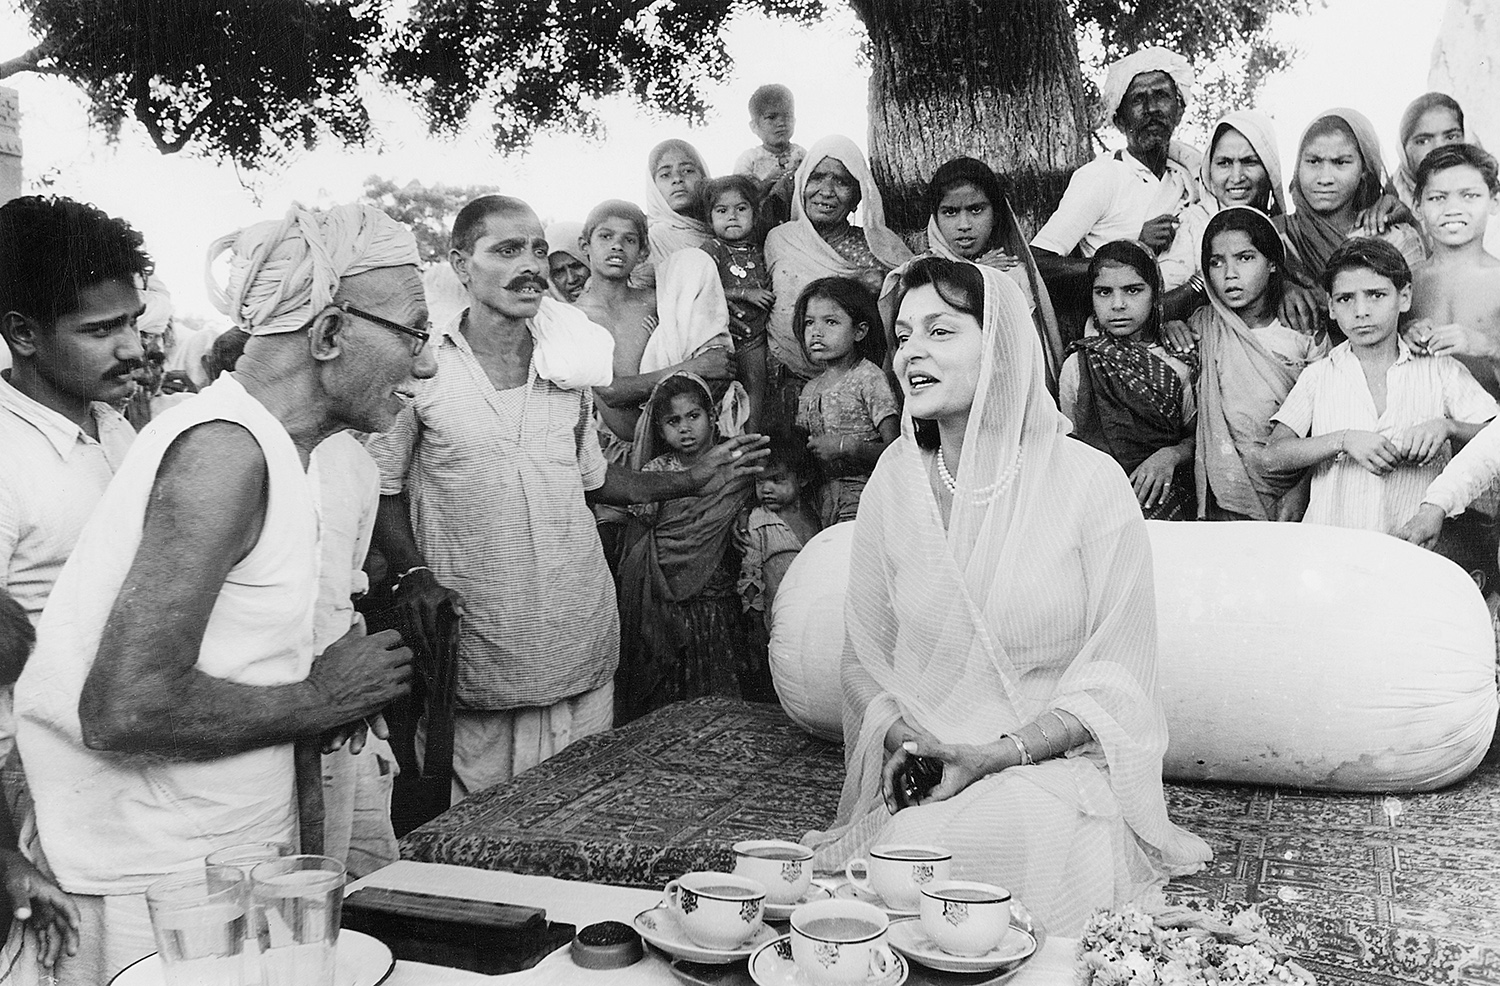 Gayatri Devi with villagers in Rajasthan during her election campaign in 1962.